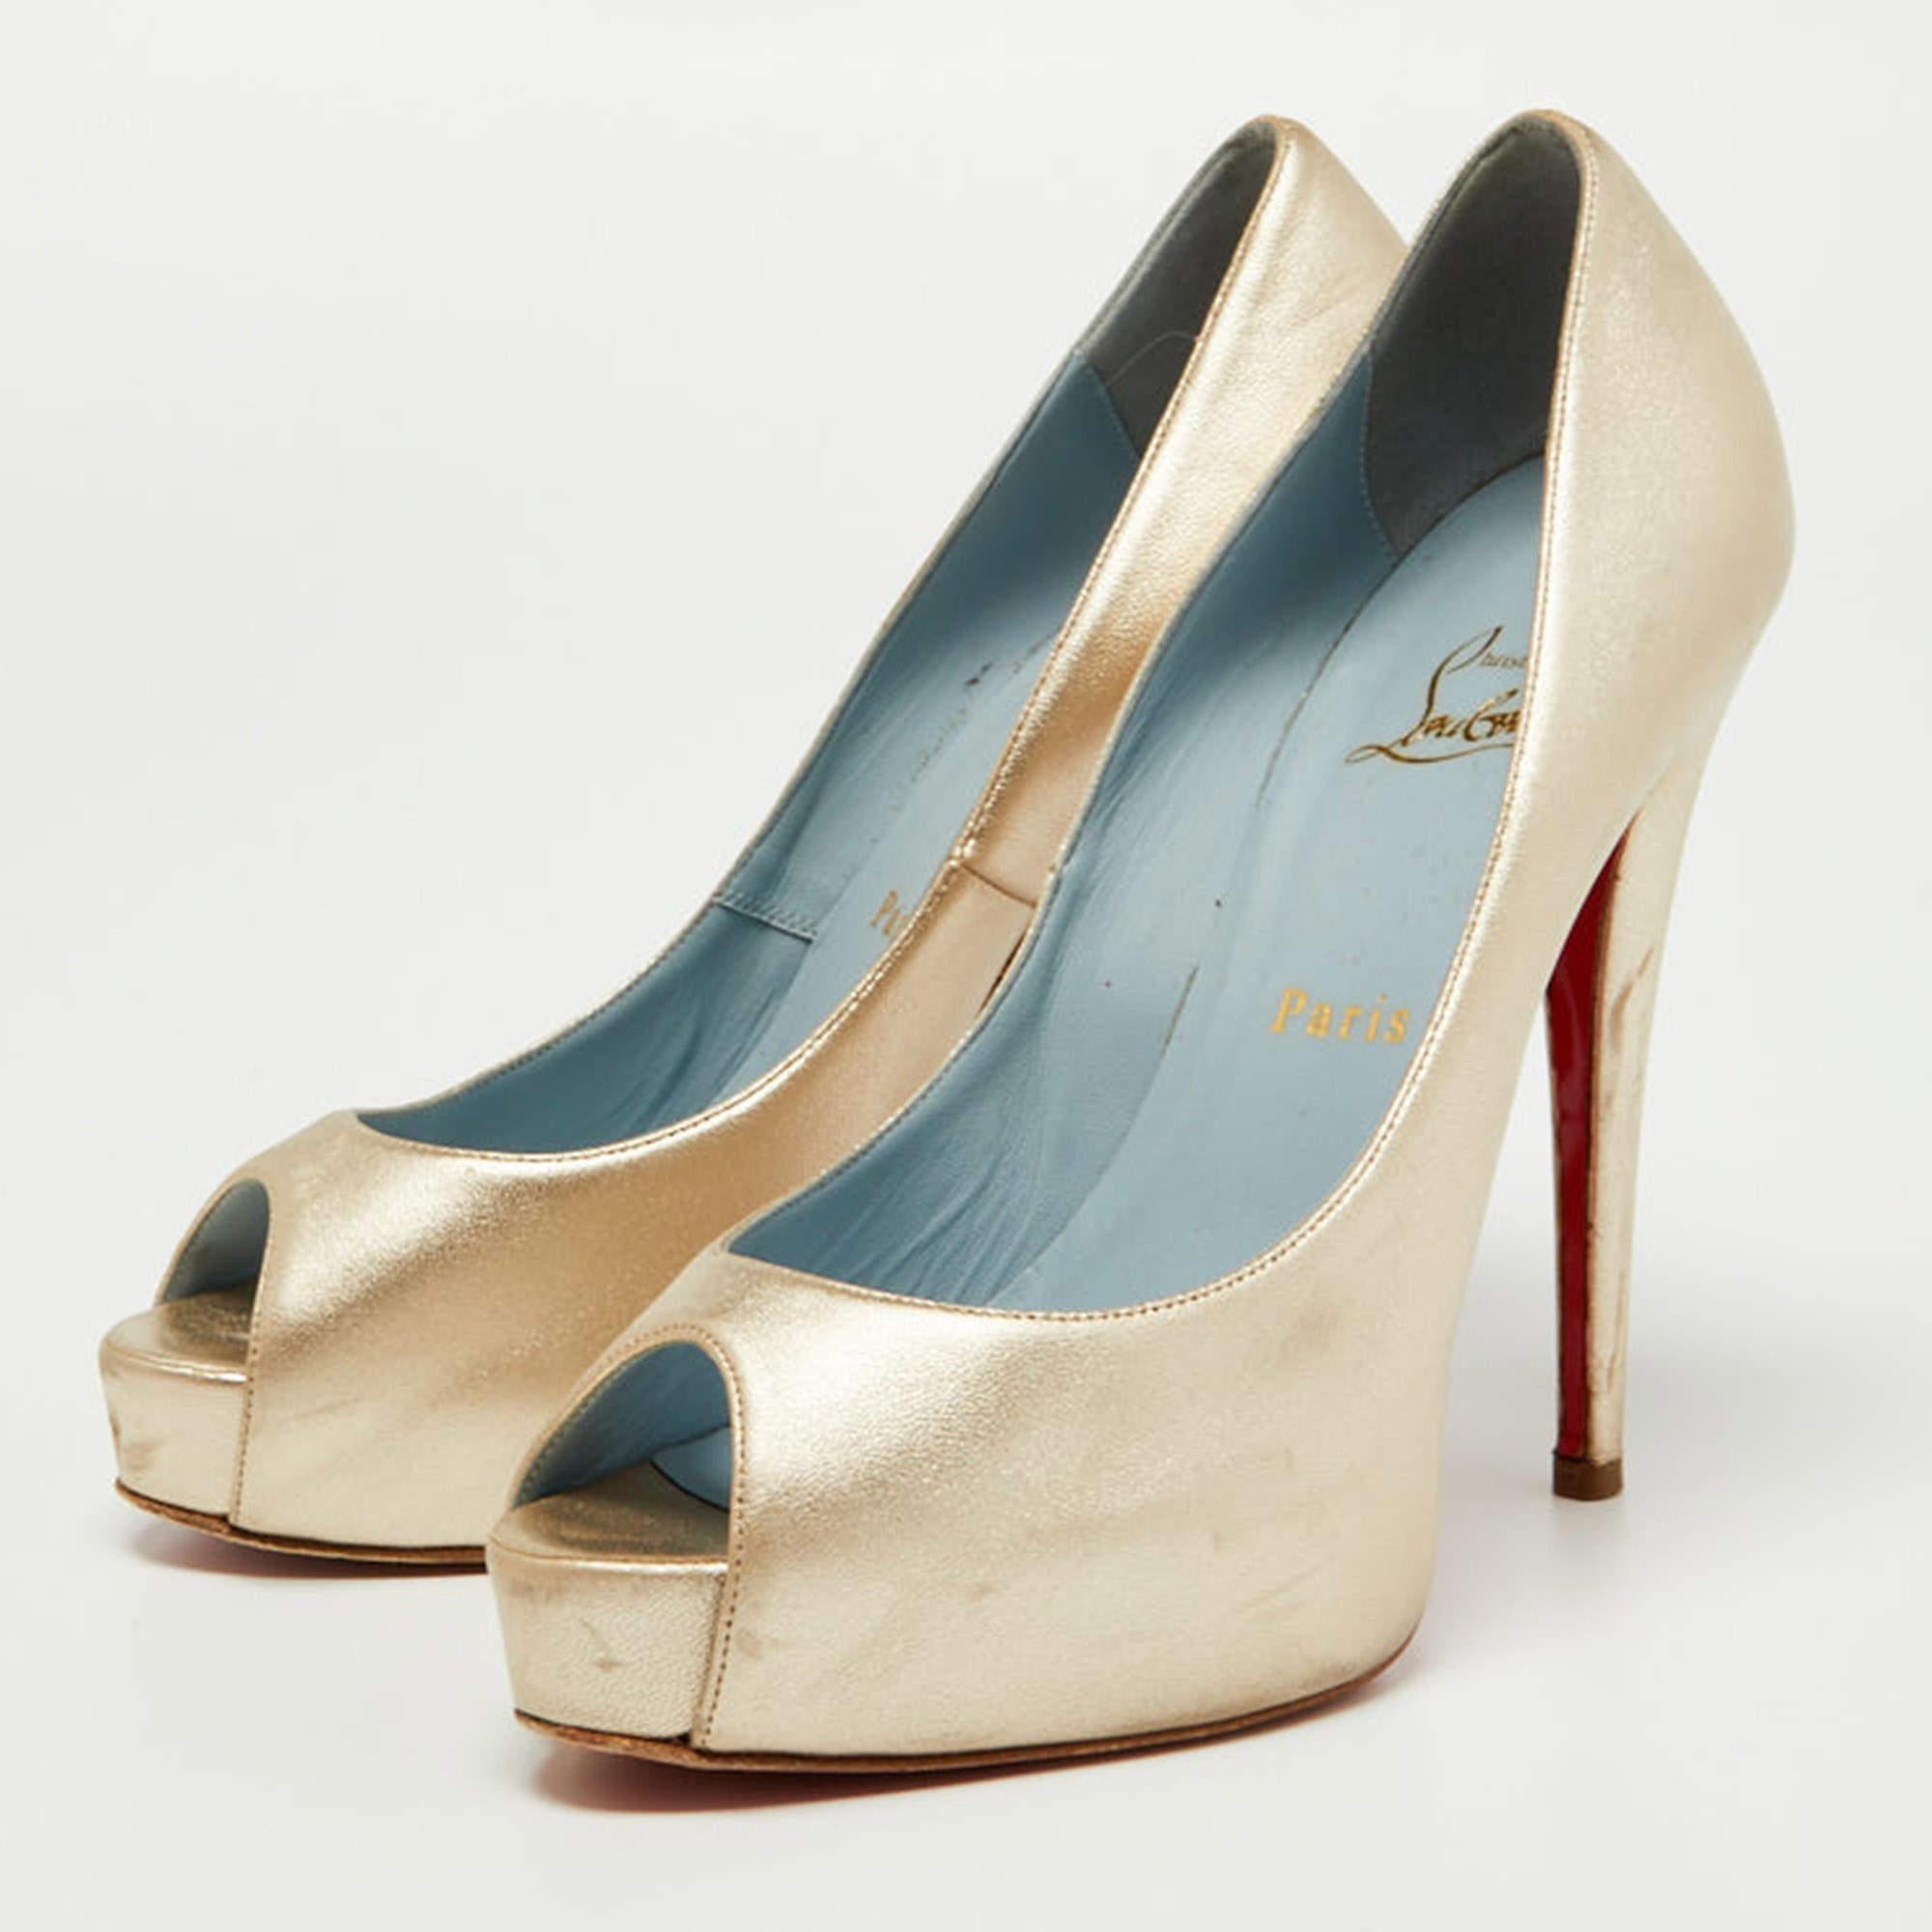 Stride through the day with confidence by adorning this pair of Christian Louboutin pumps. Created from gold leather, its well-designed curves will elegantly outline your feet. The 13cm heels of these peep-toe shoes will take your fashion sense to